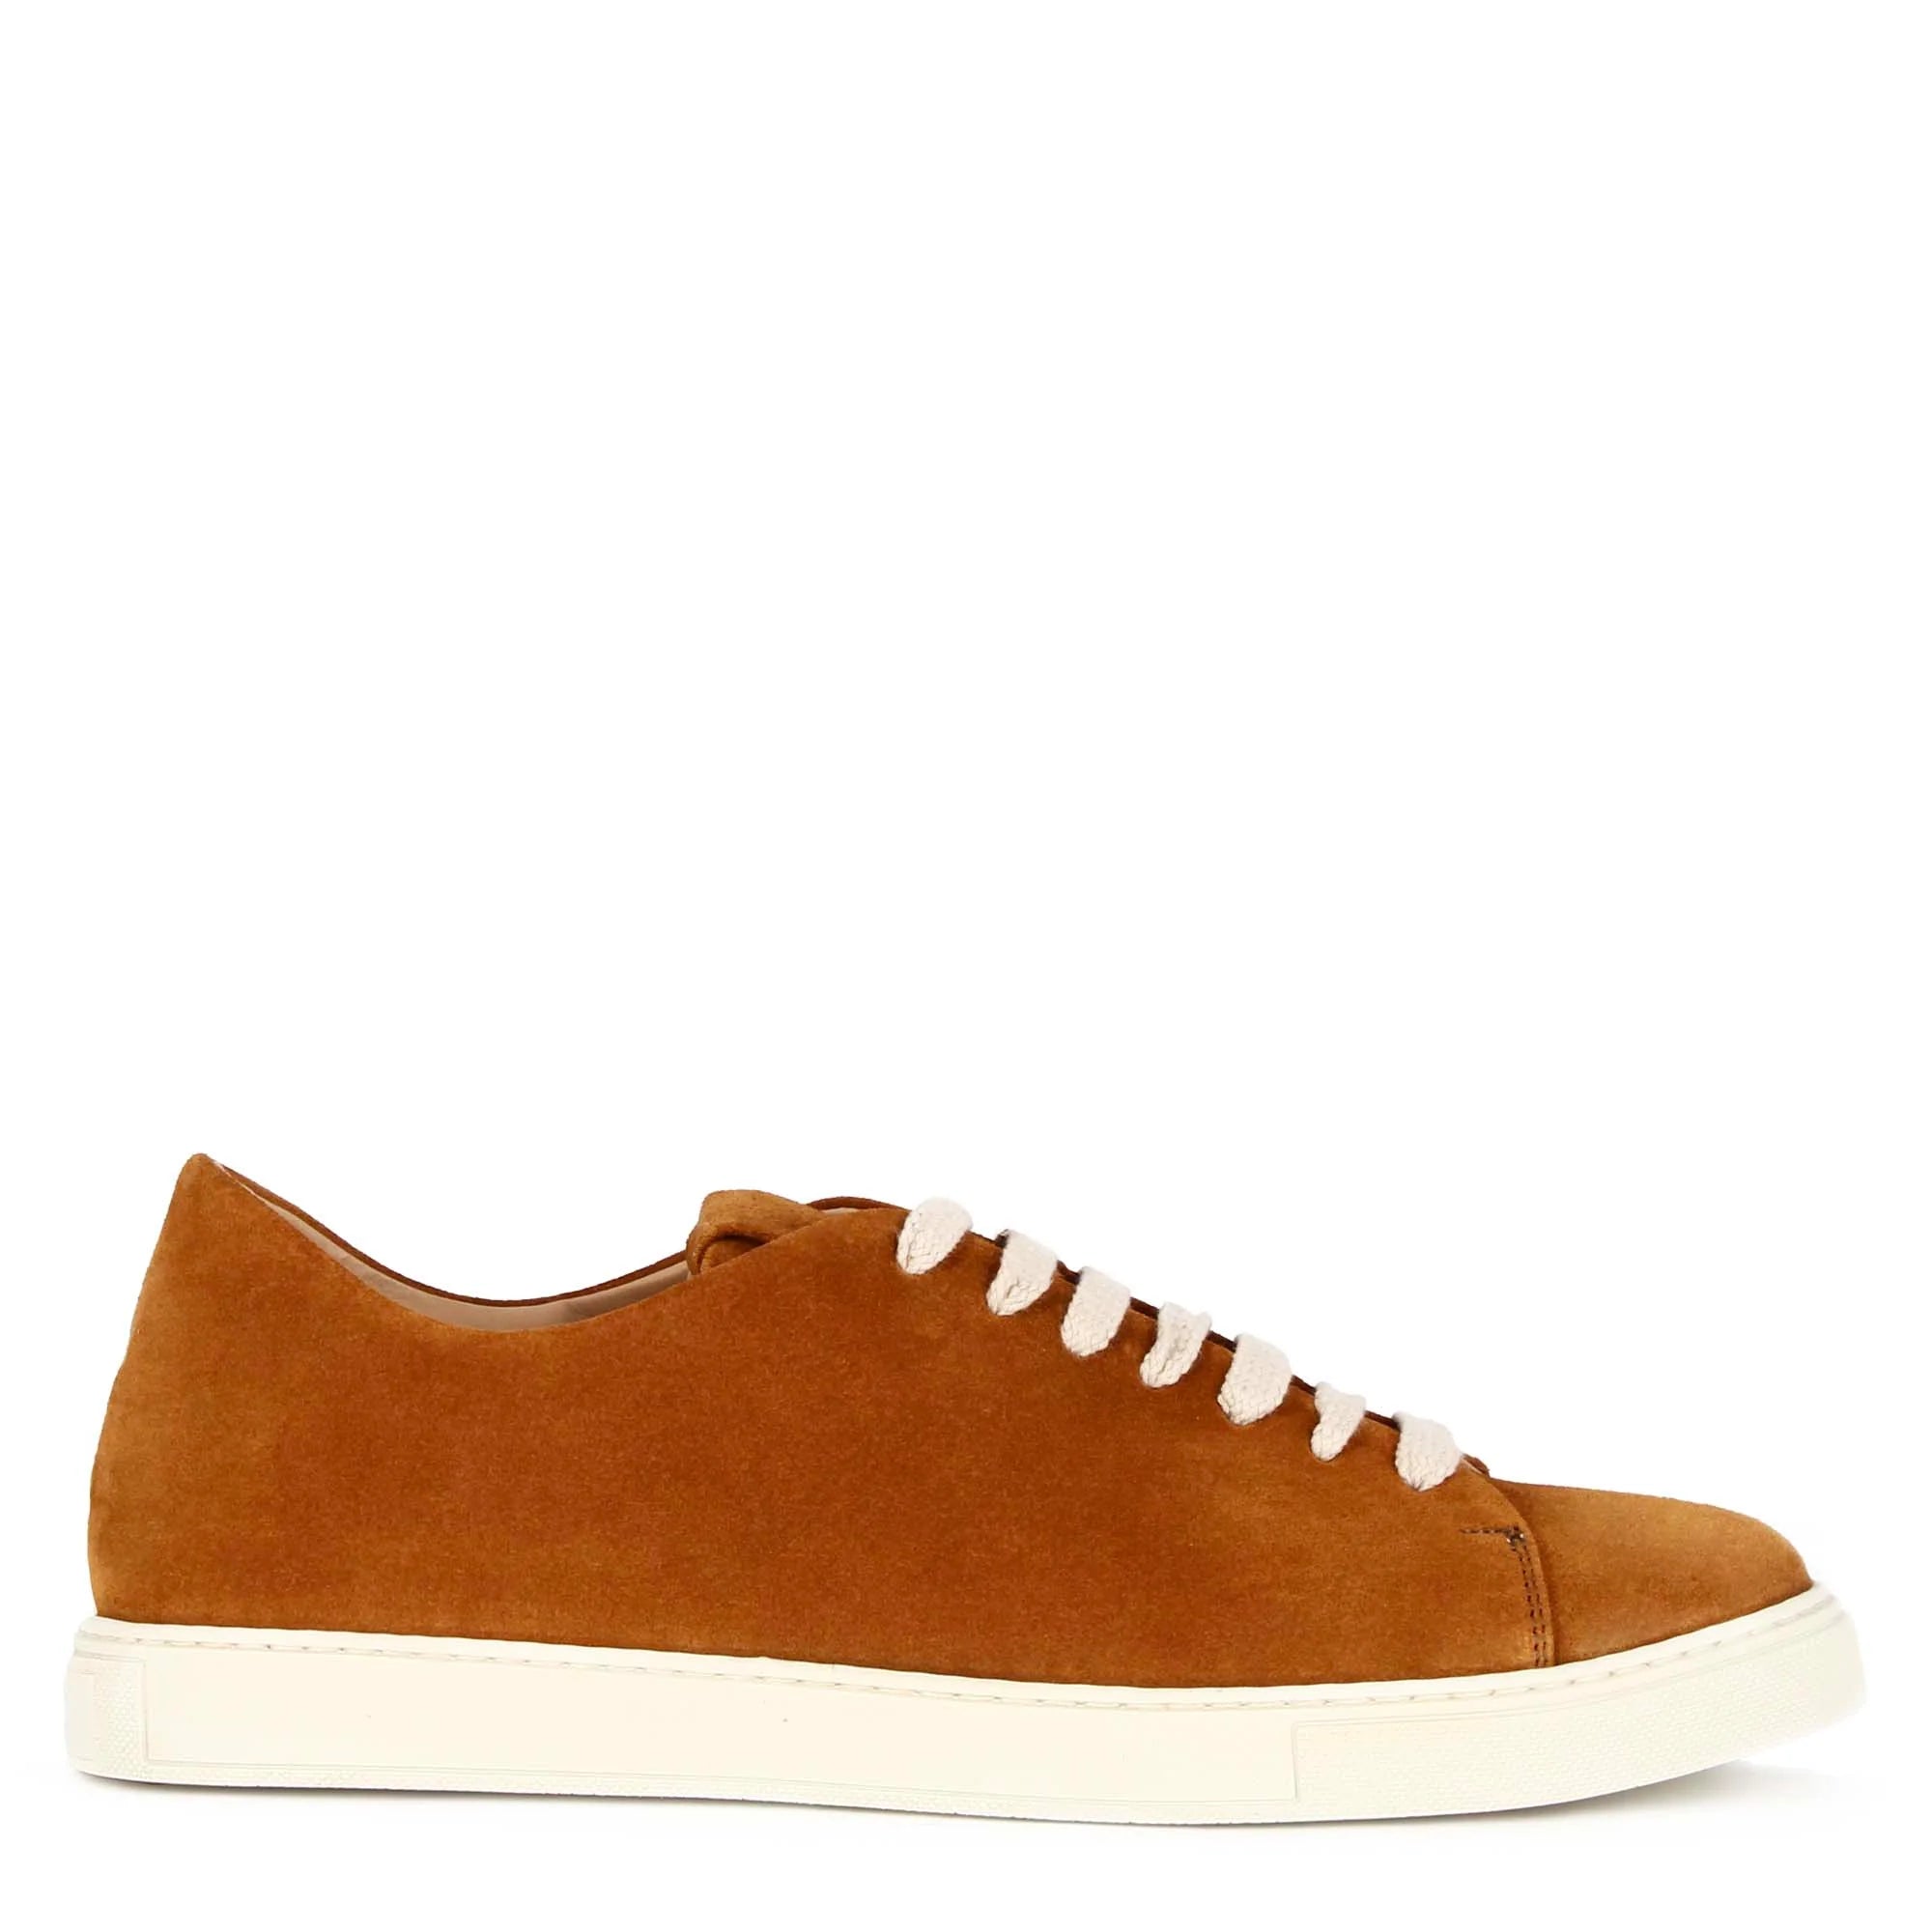 Classic Light Brown Suede Leather Sneakers